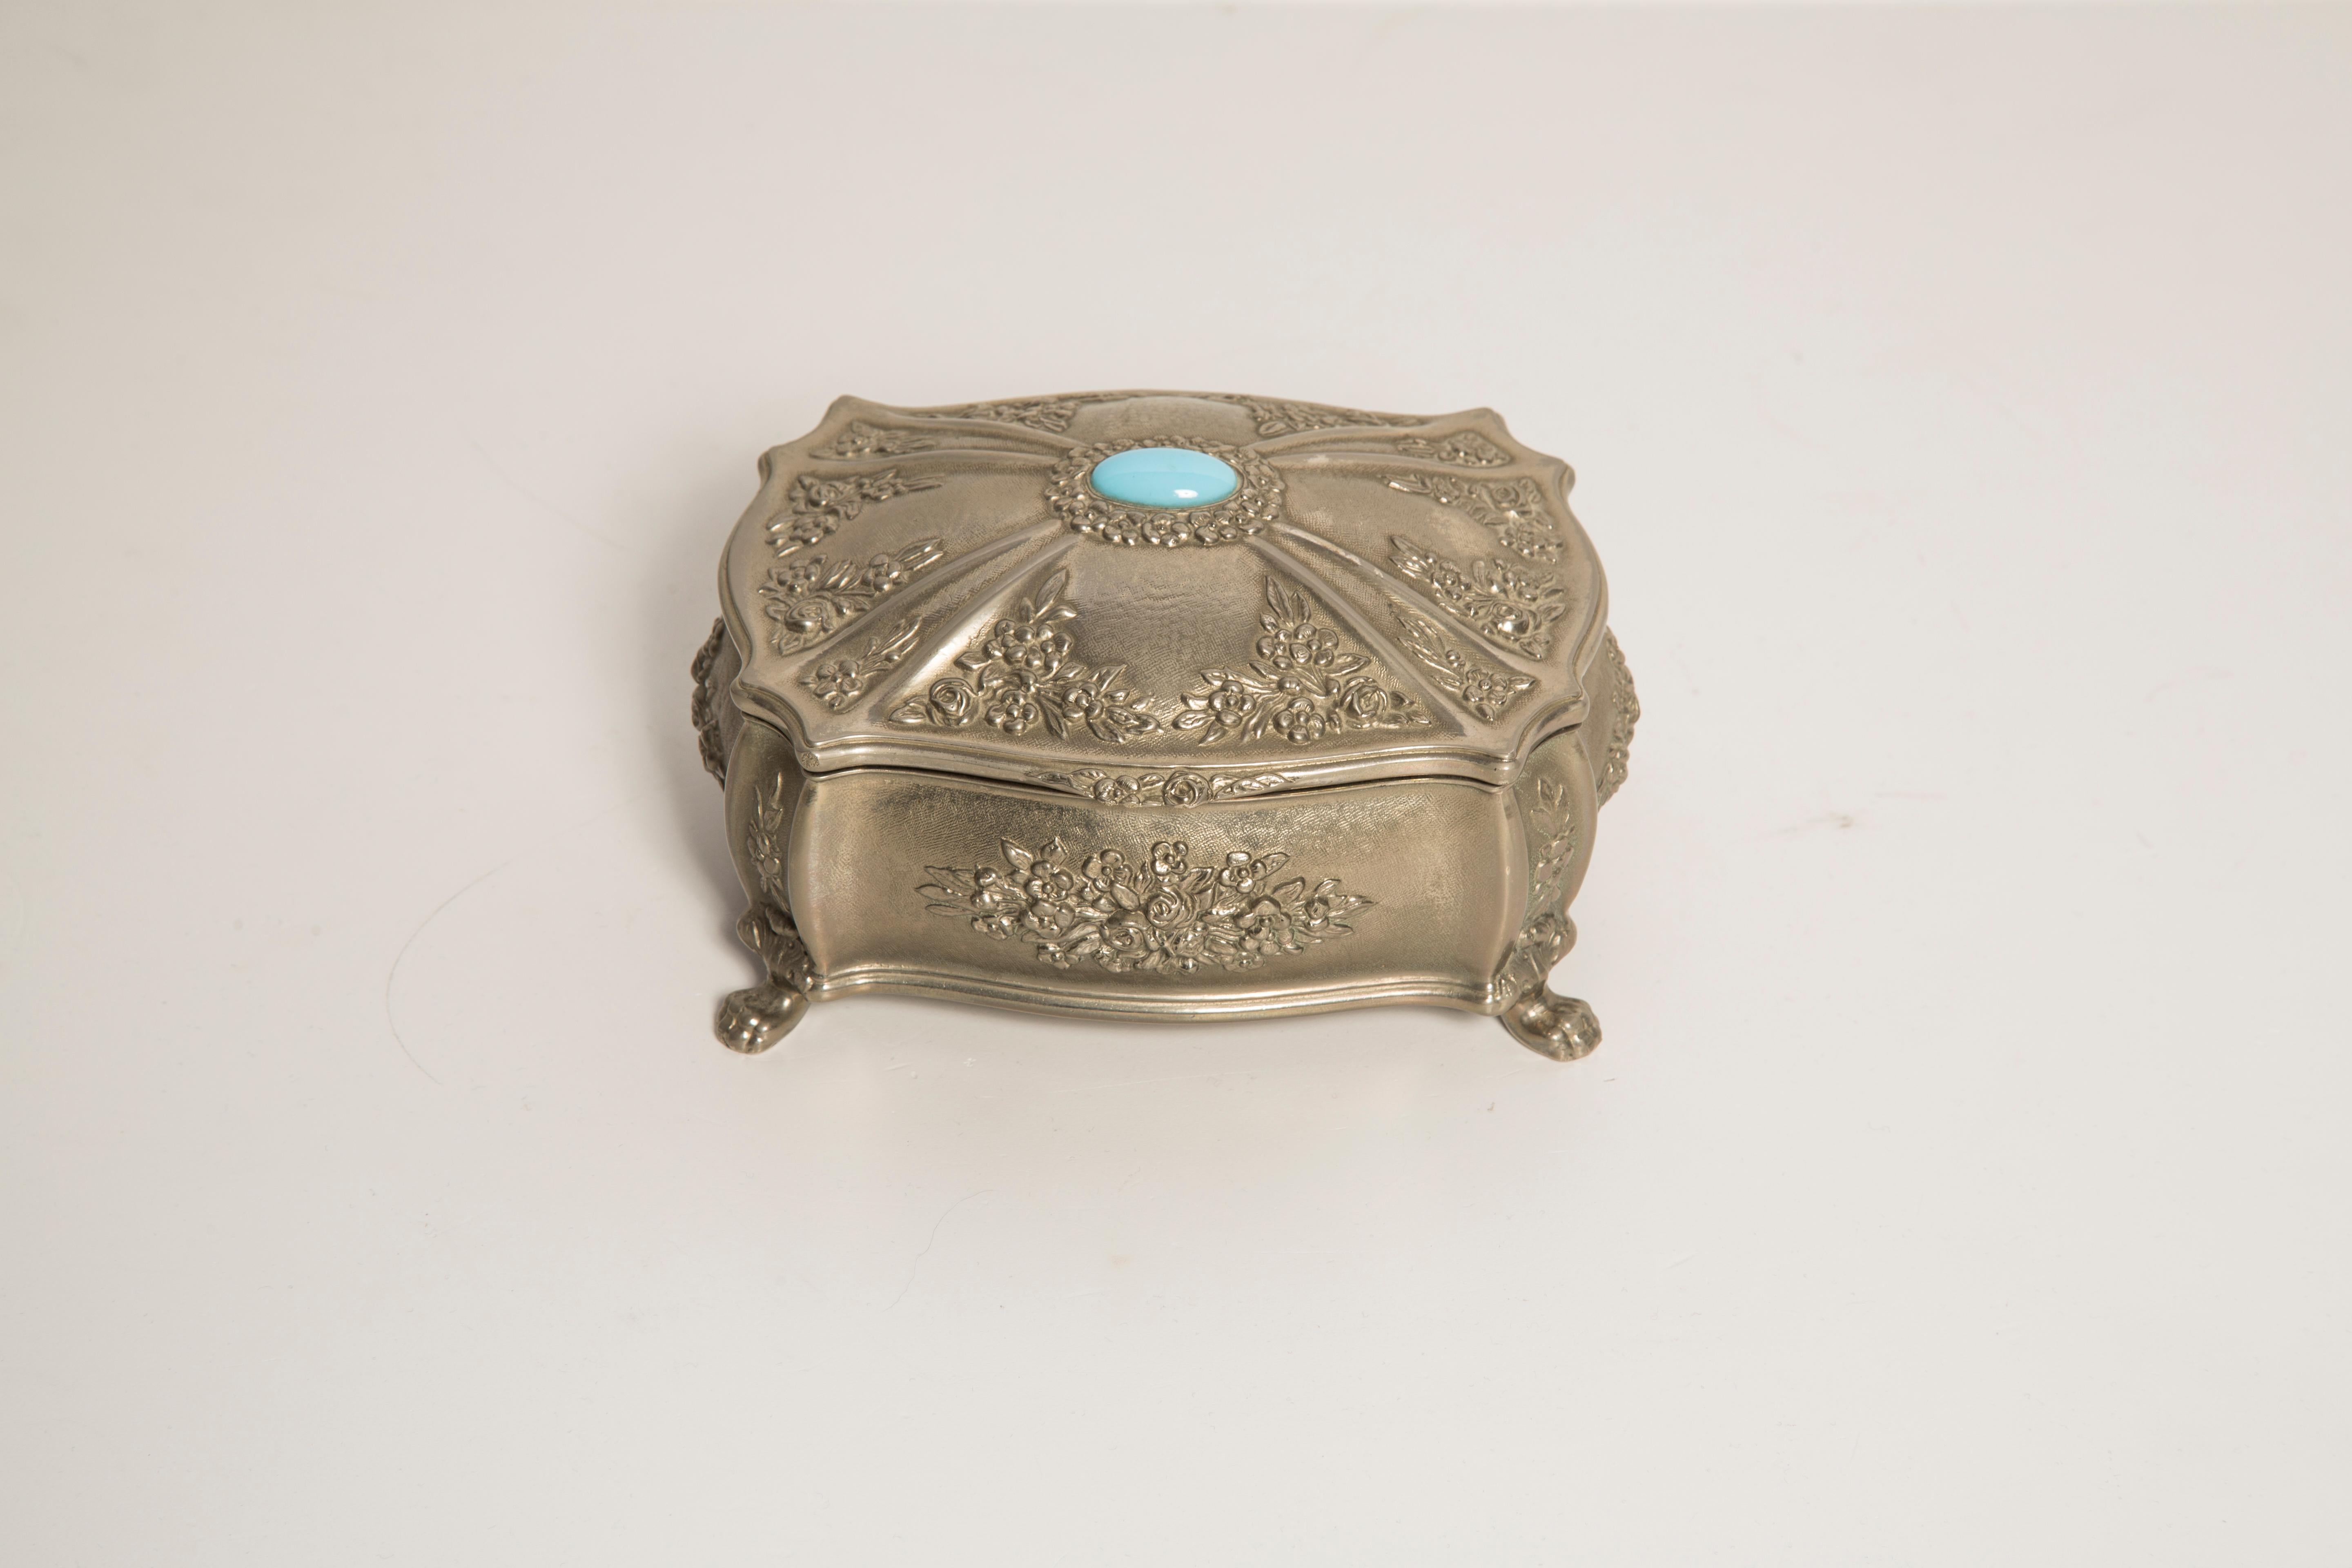 Midcentury Silver Metal Casket, Cigarette Case, or Jewelry Box, Italy, 1960s For Sale 2